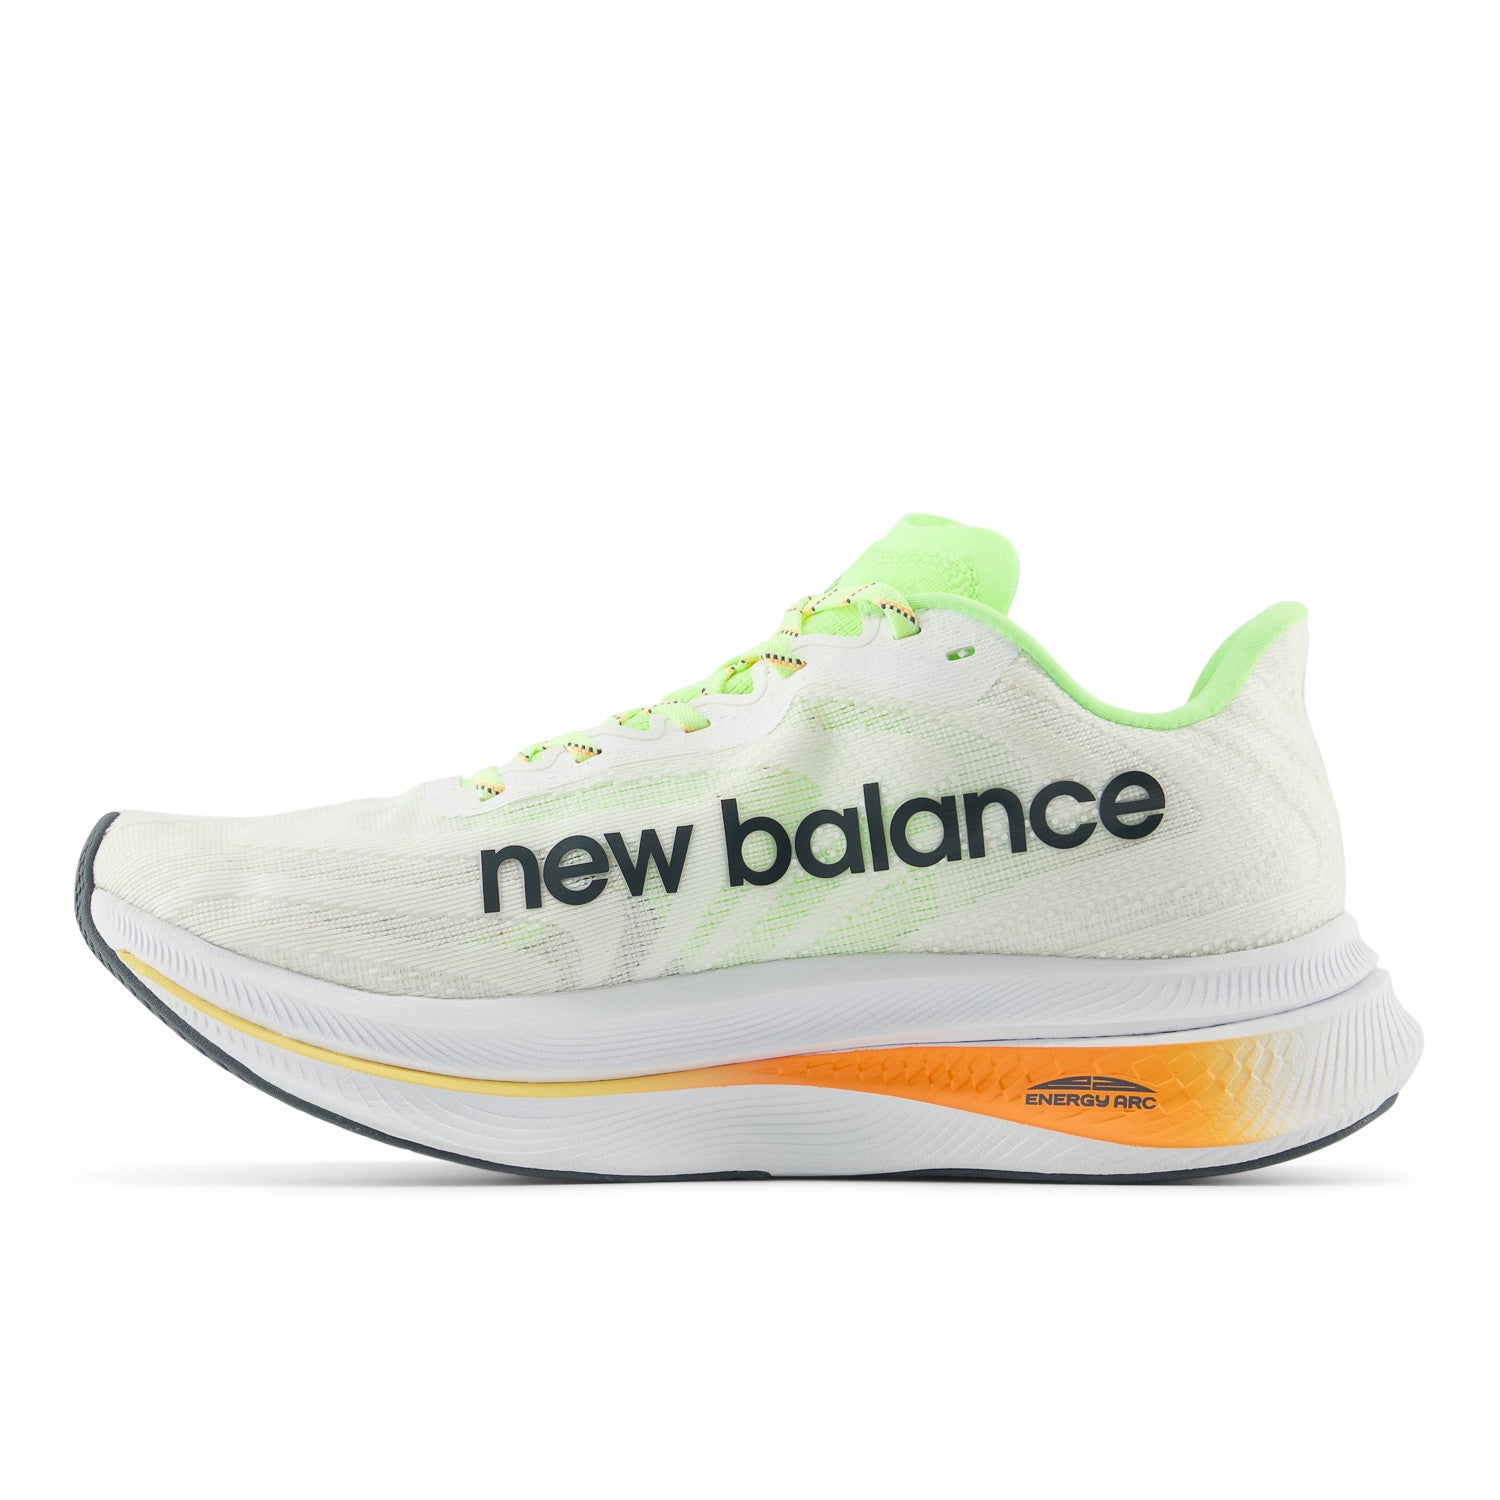 NEW BALANCE MEN'S FUELCELL SUPERCOMP TRAINER V2 - D - CA3 WHITE/BLEACHED LIME 